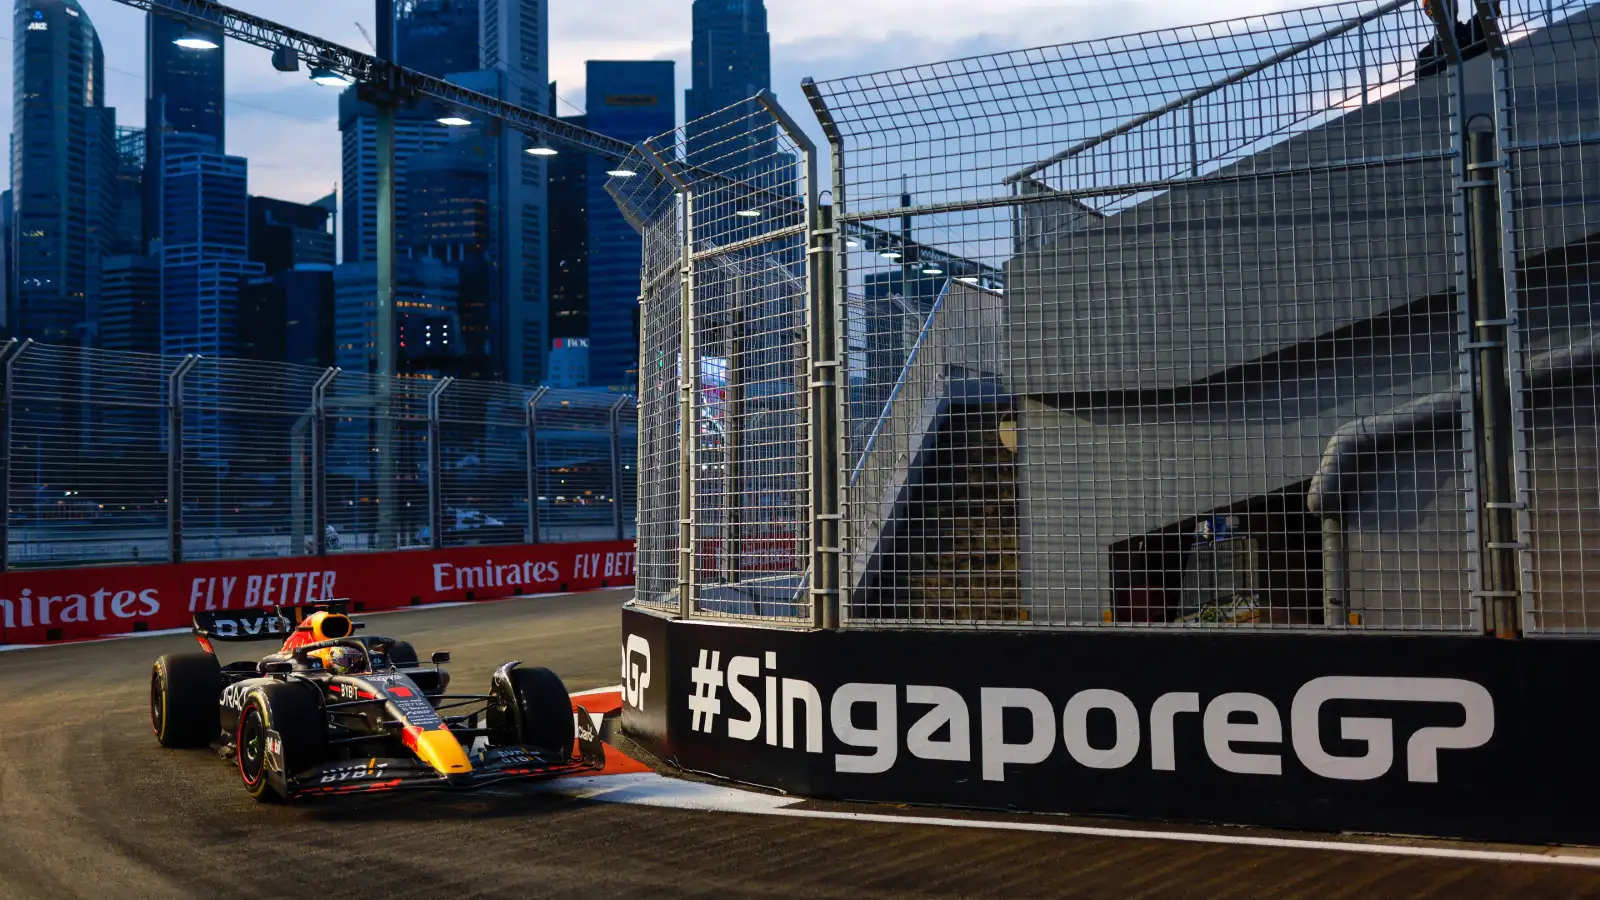 Singapore: Red Bull F1 driver Max Verstappen drives at Marina Bay in 2022.